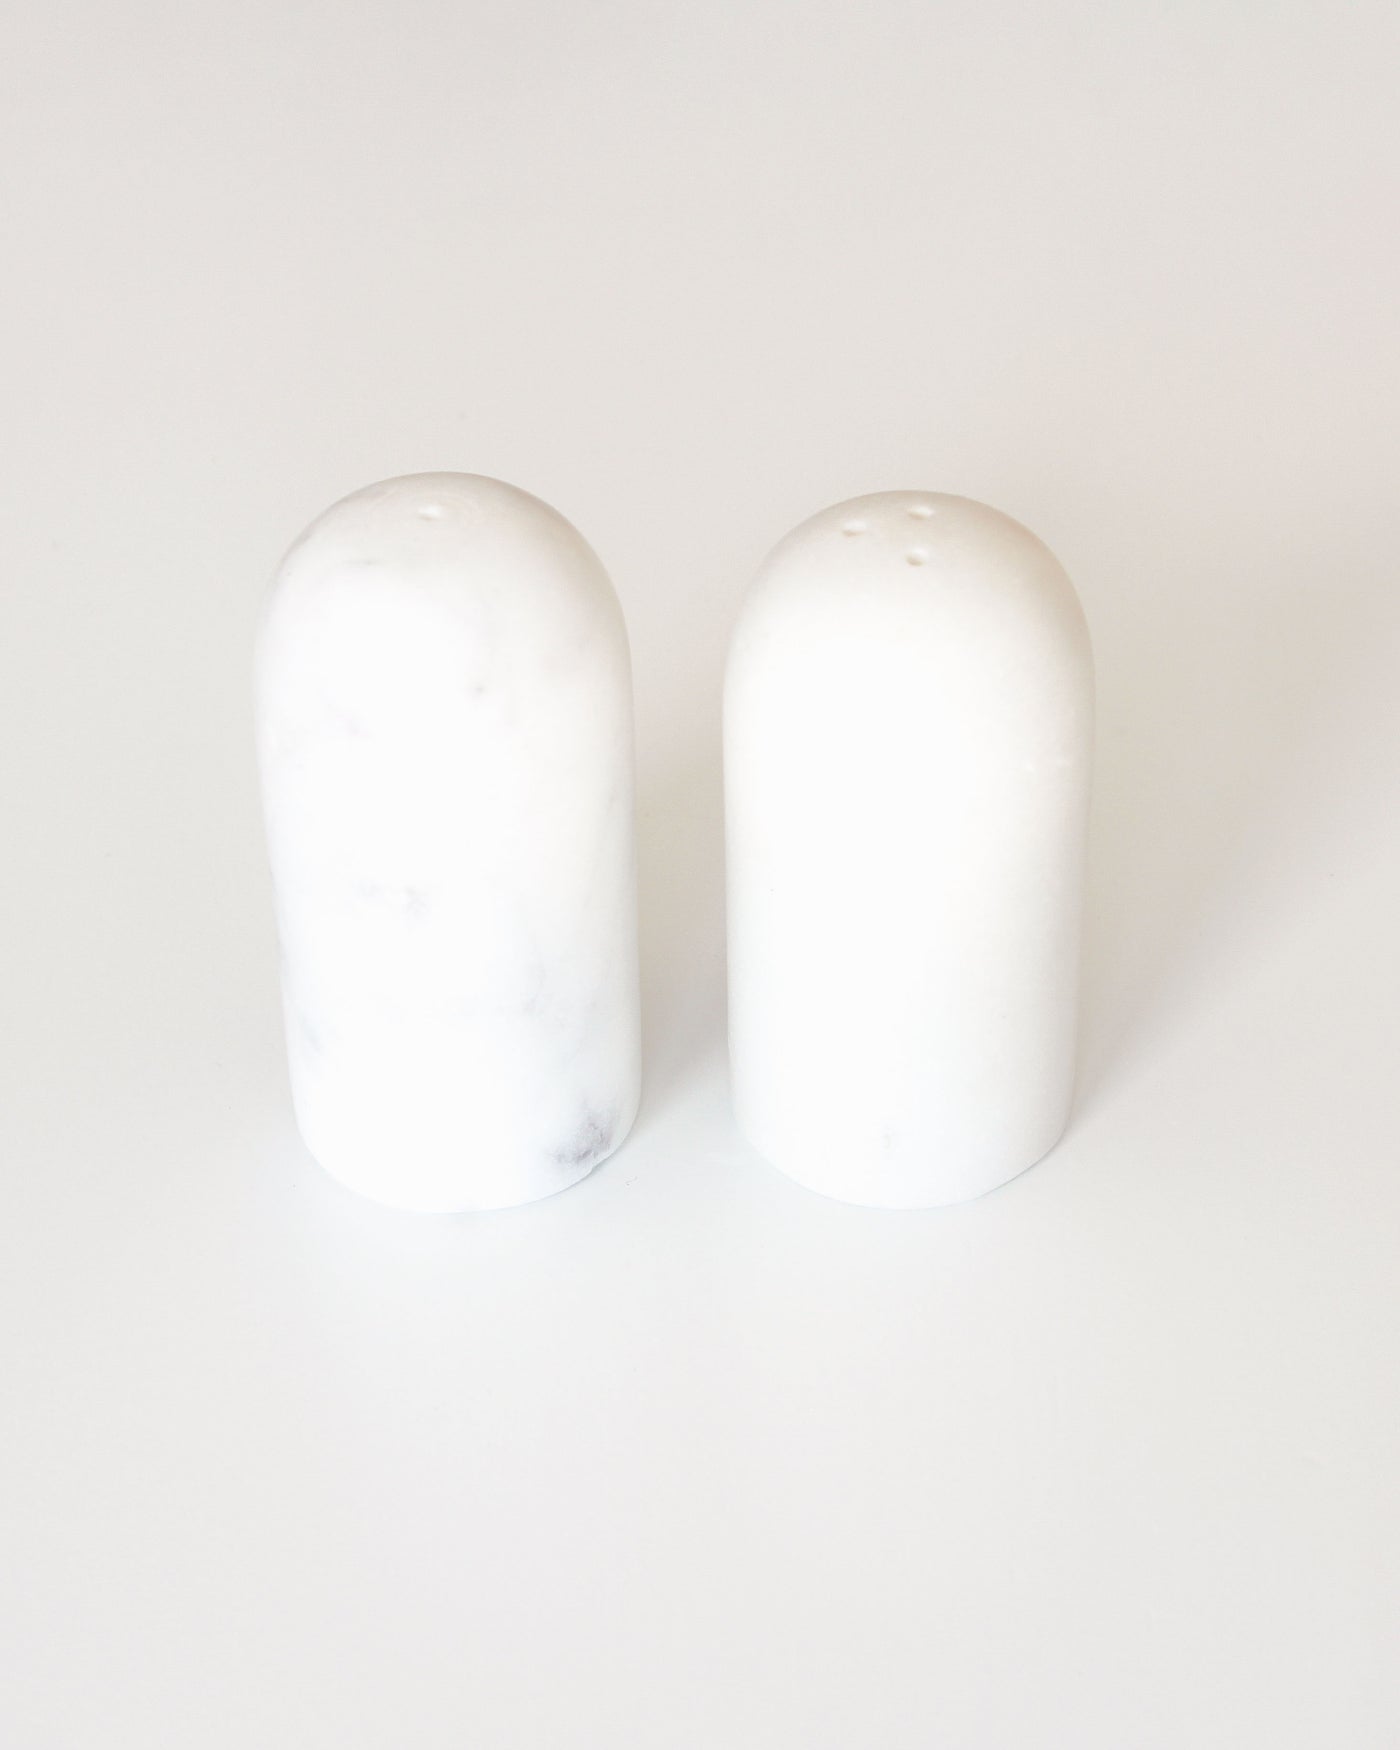 Stay Salty Salt and Pepper Shakers with Divided Marble Tray